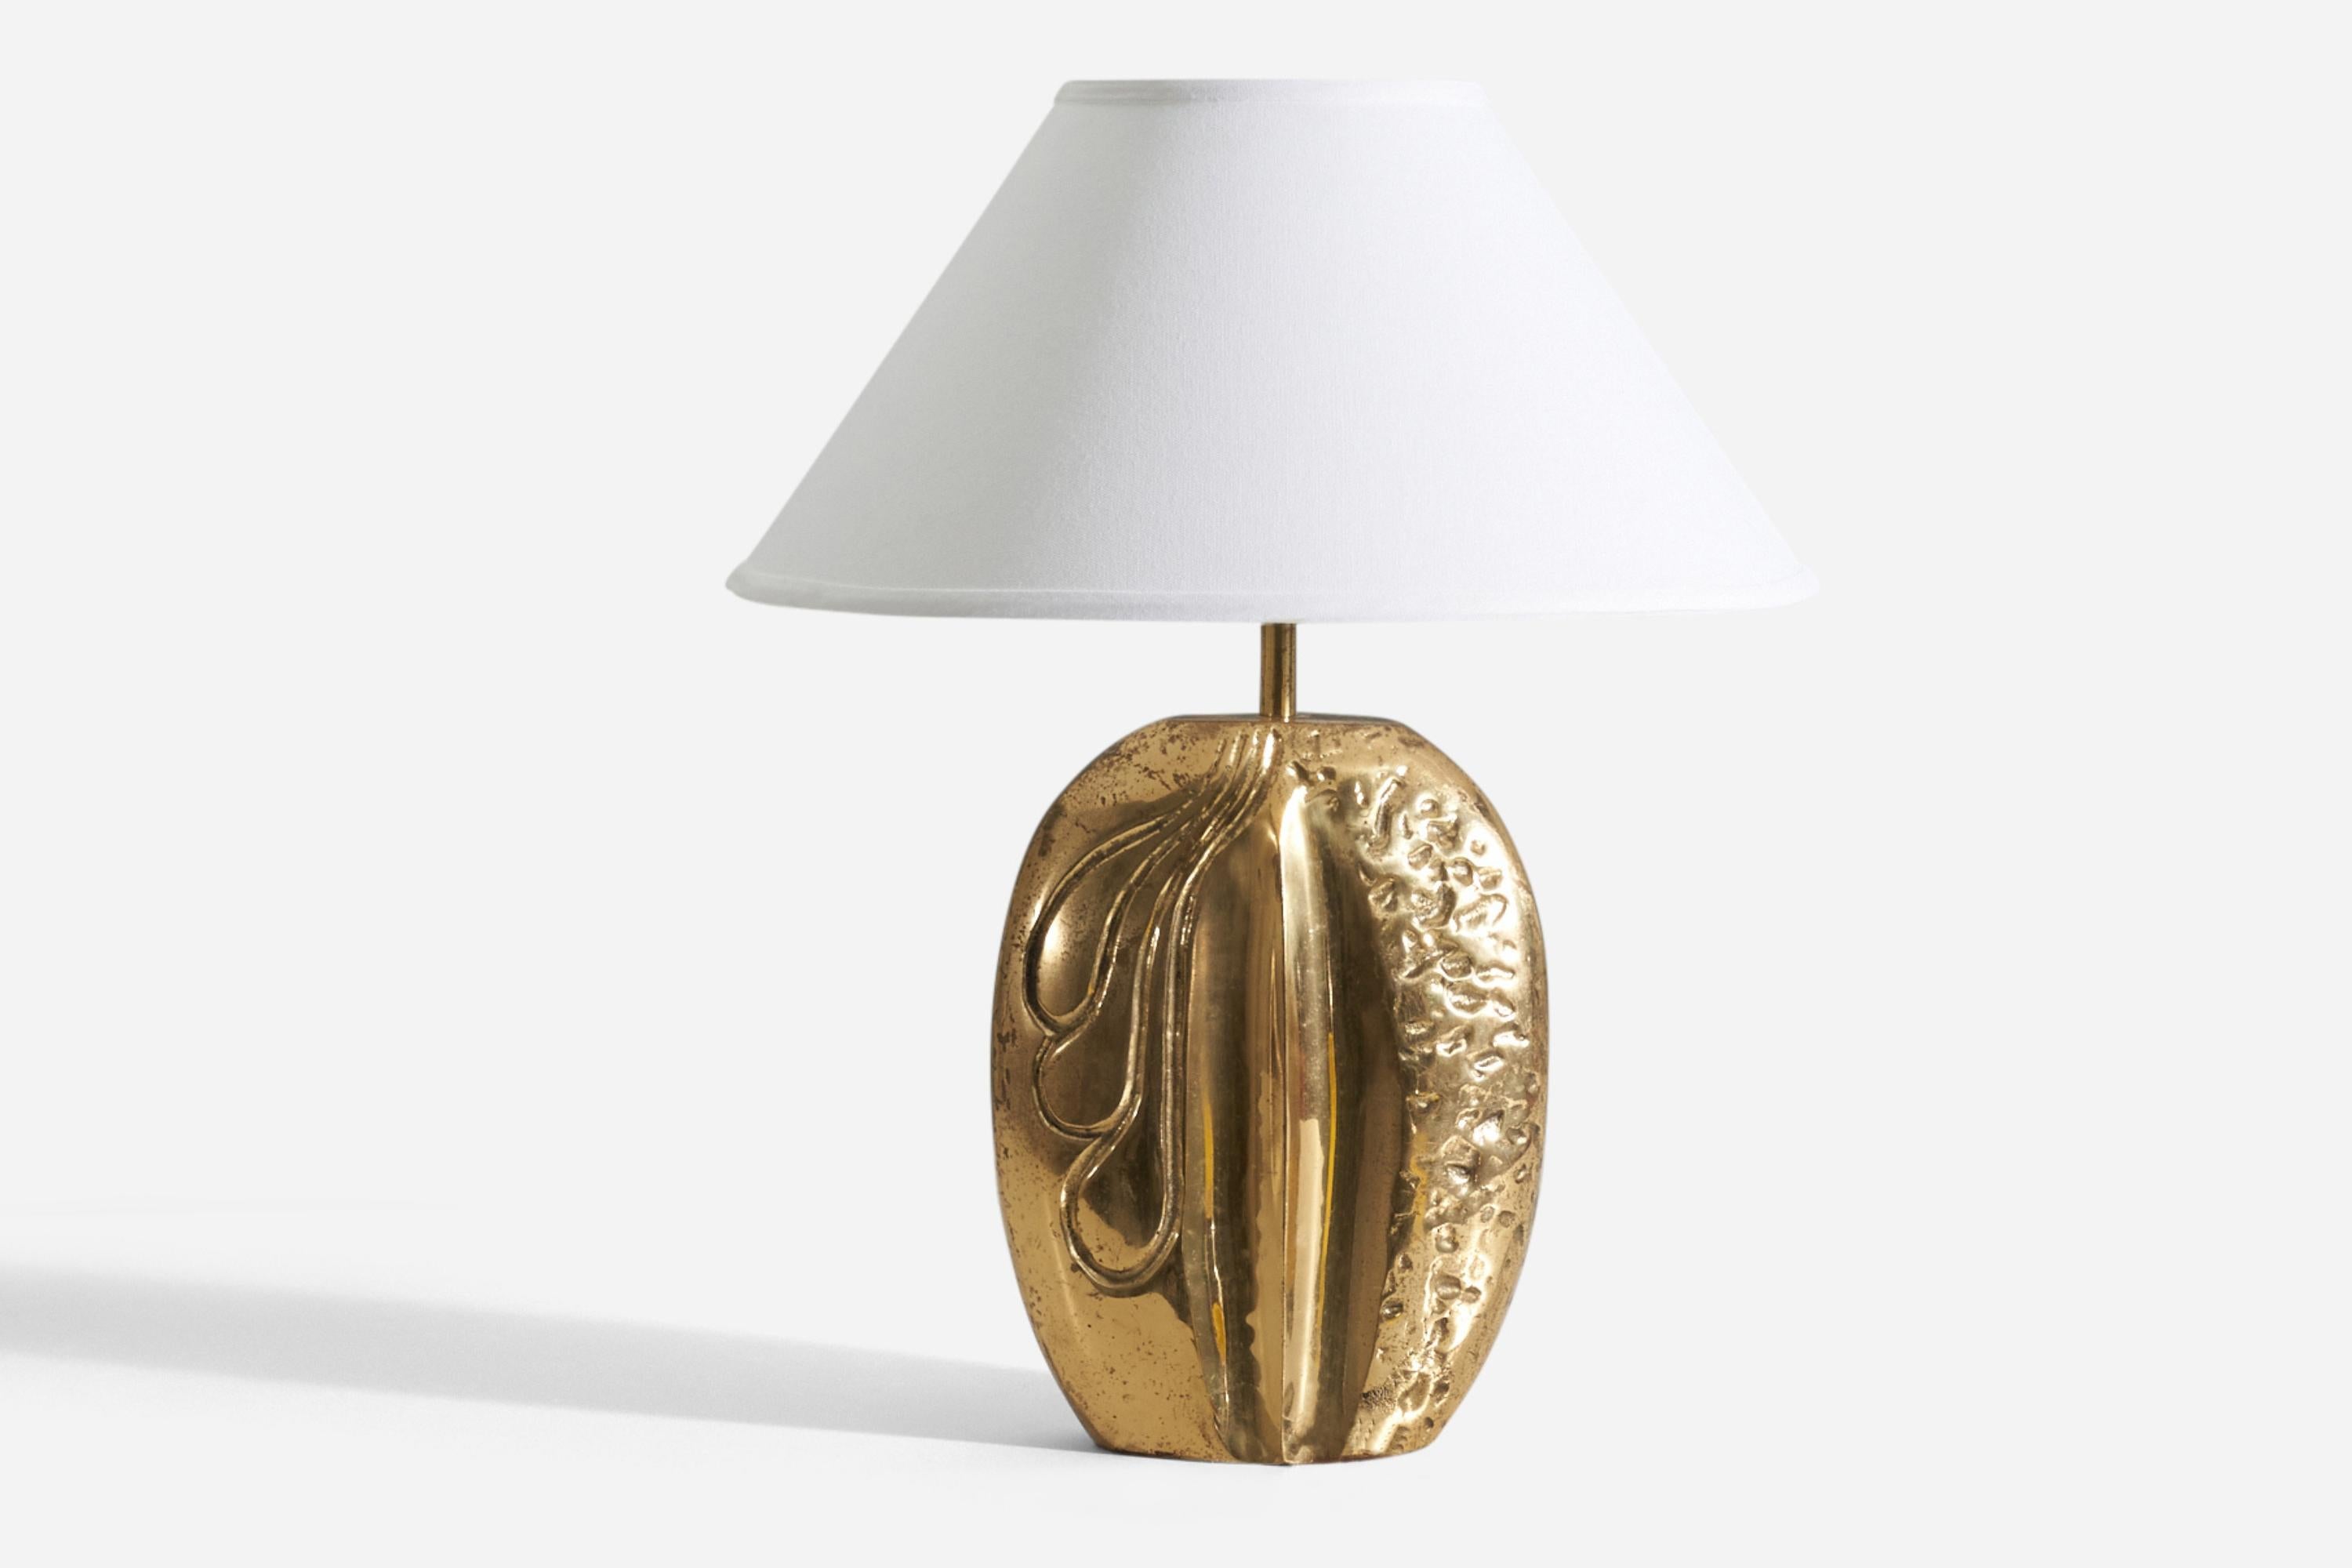 Italian, Modernist Table Lamp, Gold-Plated Brass, Fabric, Italy, 1960s In Good Condition For Sale In High Point, NC